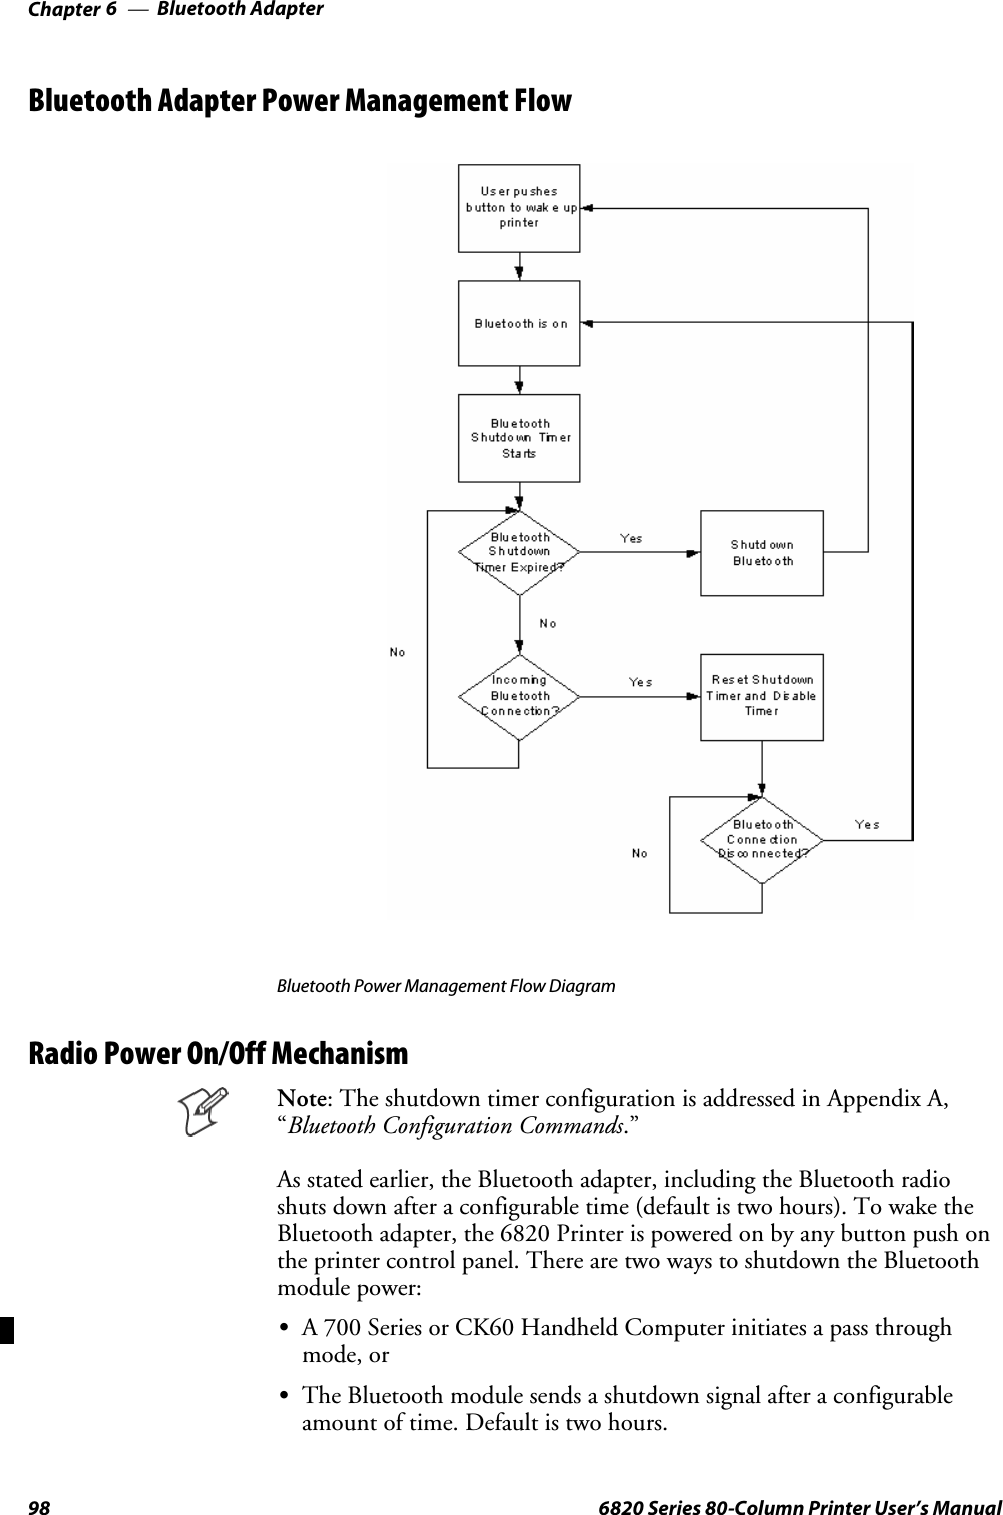 Bluetooth AdapterChapter —698 6820 Series 80-Column Printer User’s ManualBluetooth Adapter Power Management FlowBluetooth Power Management Flow DiagramRadio Power On/Off MechanismNote: The shutdown timer configuration is addressed in Appendix A,“Bluetooth Configuration Commands.”As stated earlier, the Bluetooth adapter, including the Bluetooth radioshuts down after a configurable time (default is two hours). To wake theBluetooth adapter, the 6820 Printer is powered on by any button push onthe printer control panel. There are two ways to shutdown the Bluetoothmodule power:SA 700 Series or CK60 Handheld Computer initiates a pass throughmode, orSThe Bluetooth module sends a shutdown signal after a configurableamount of time. Default is two hours.